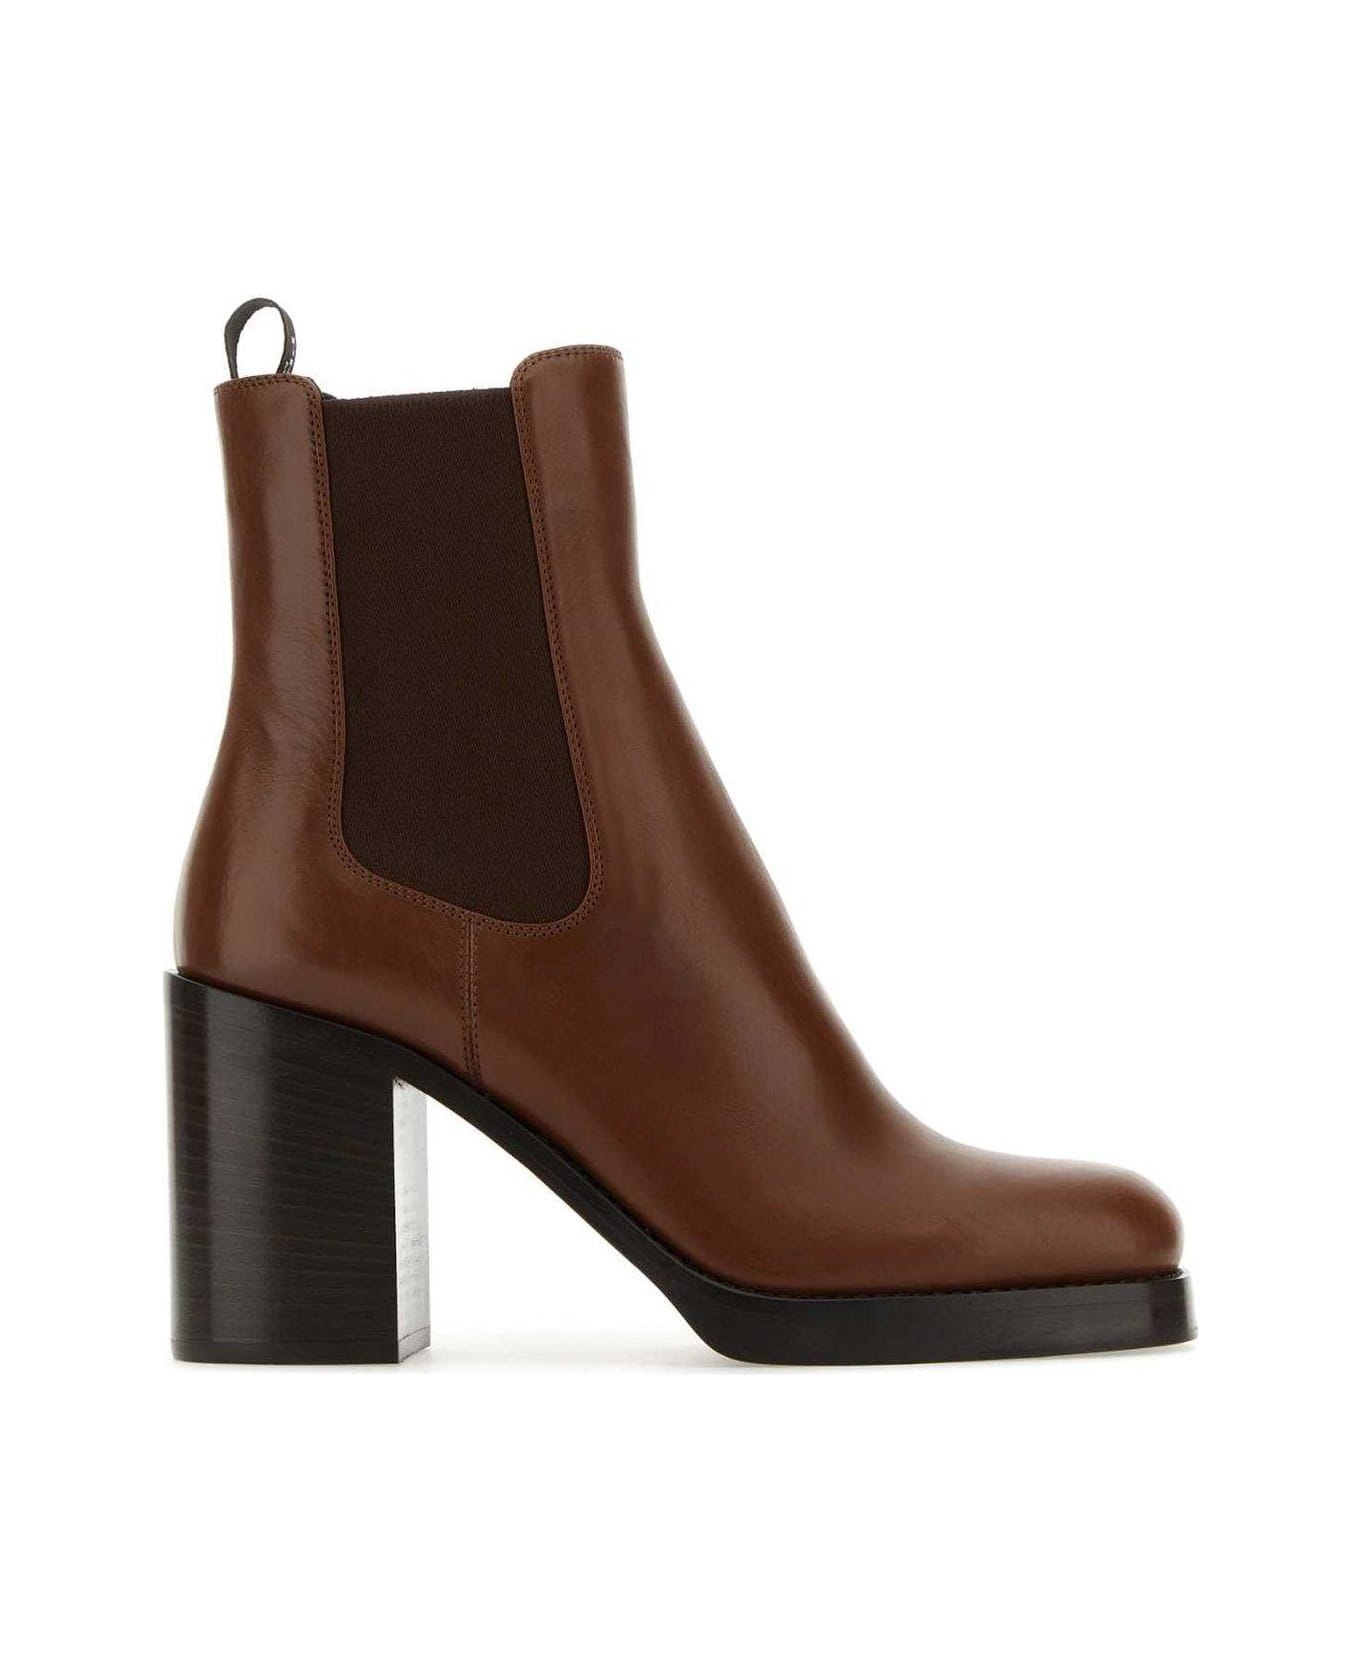 Prada Rounded-toe Ankle Boots - CAMEL